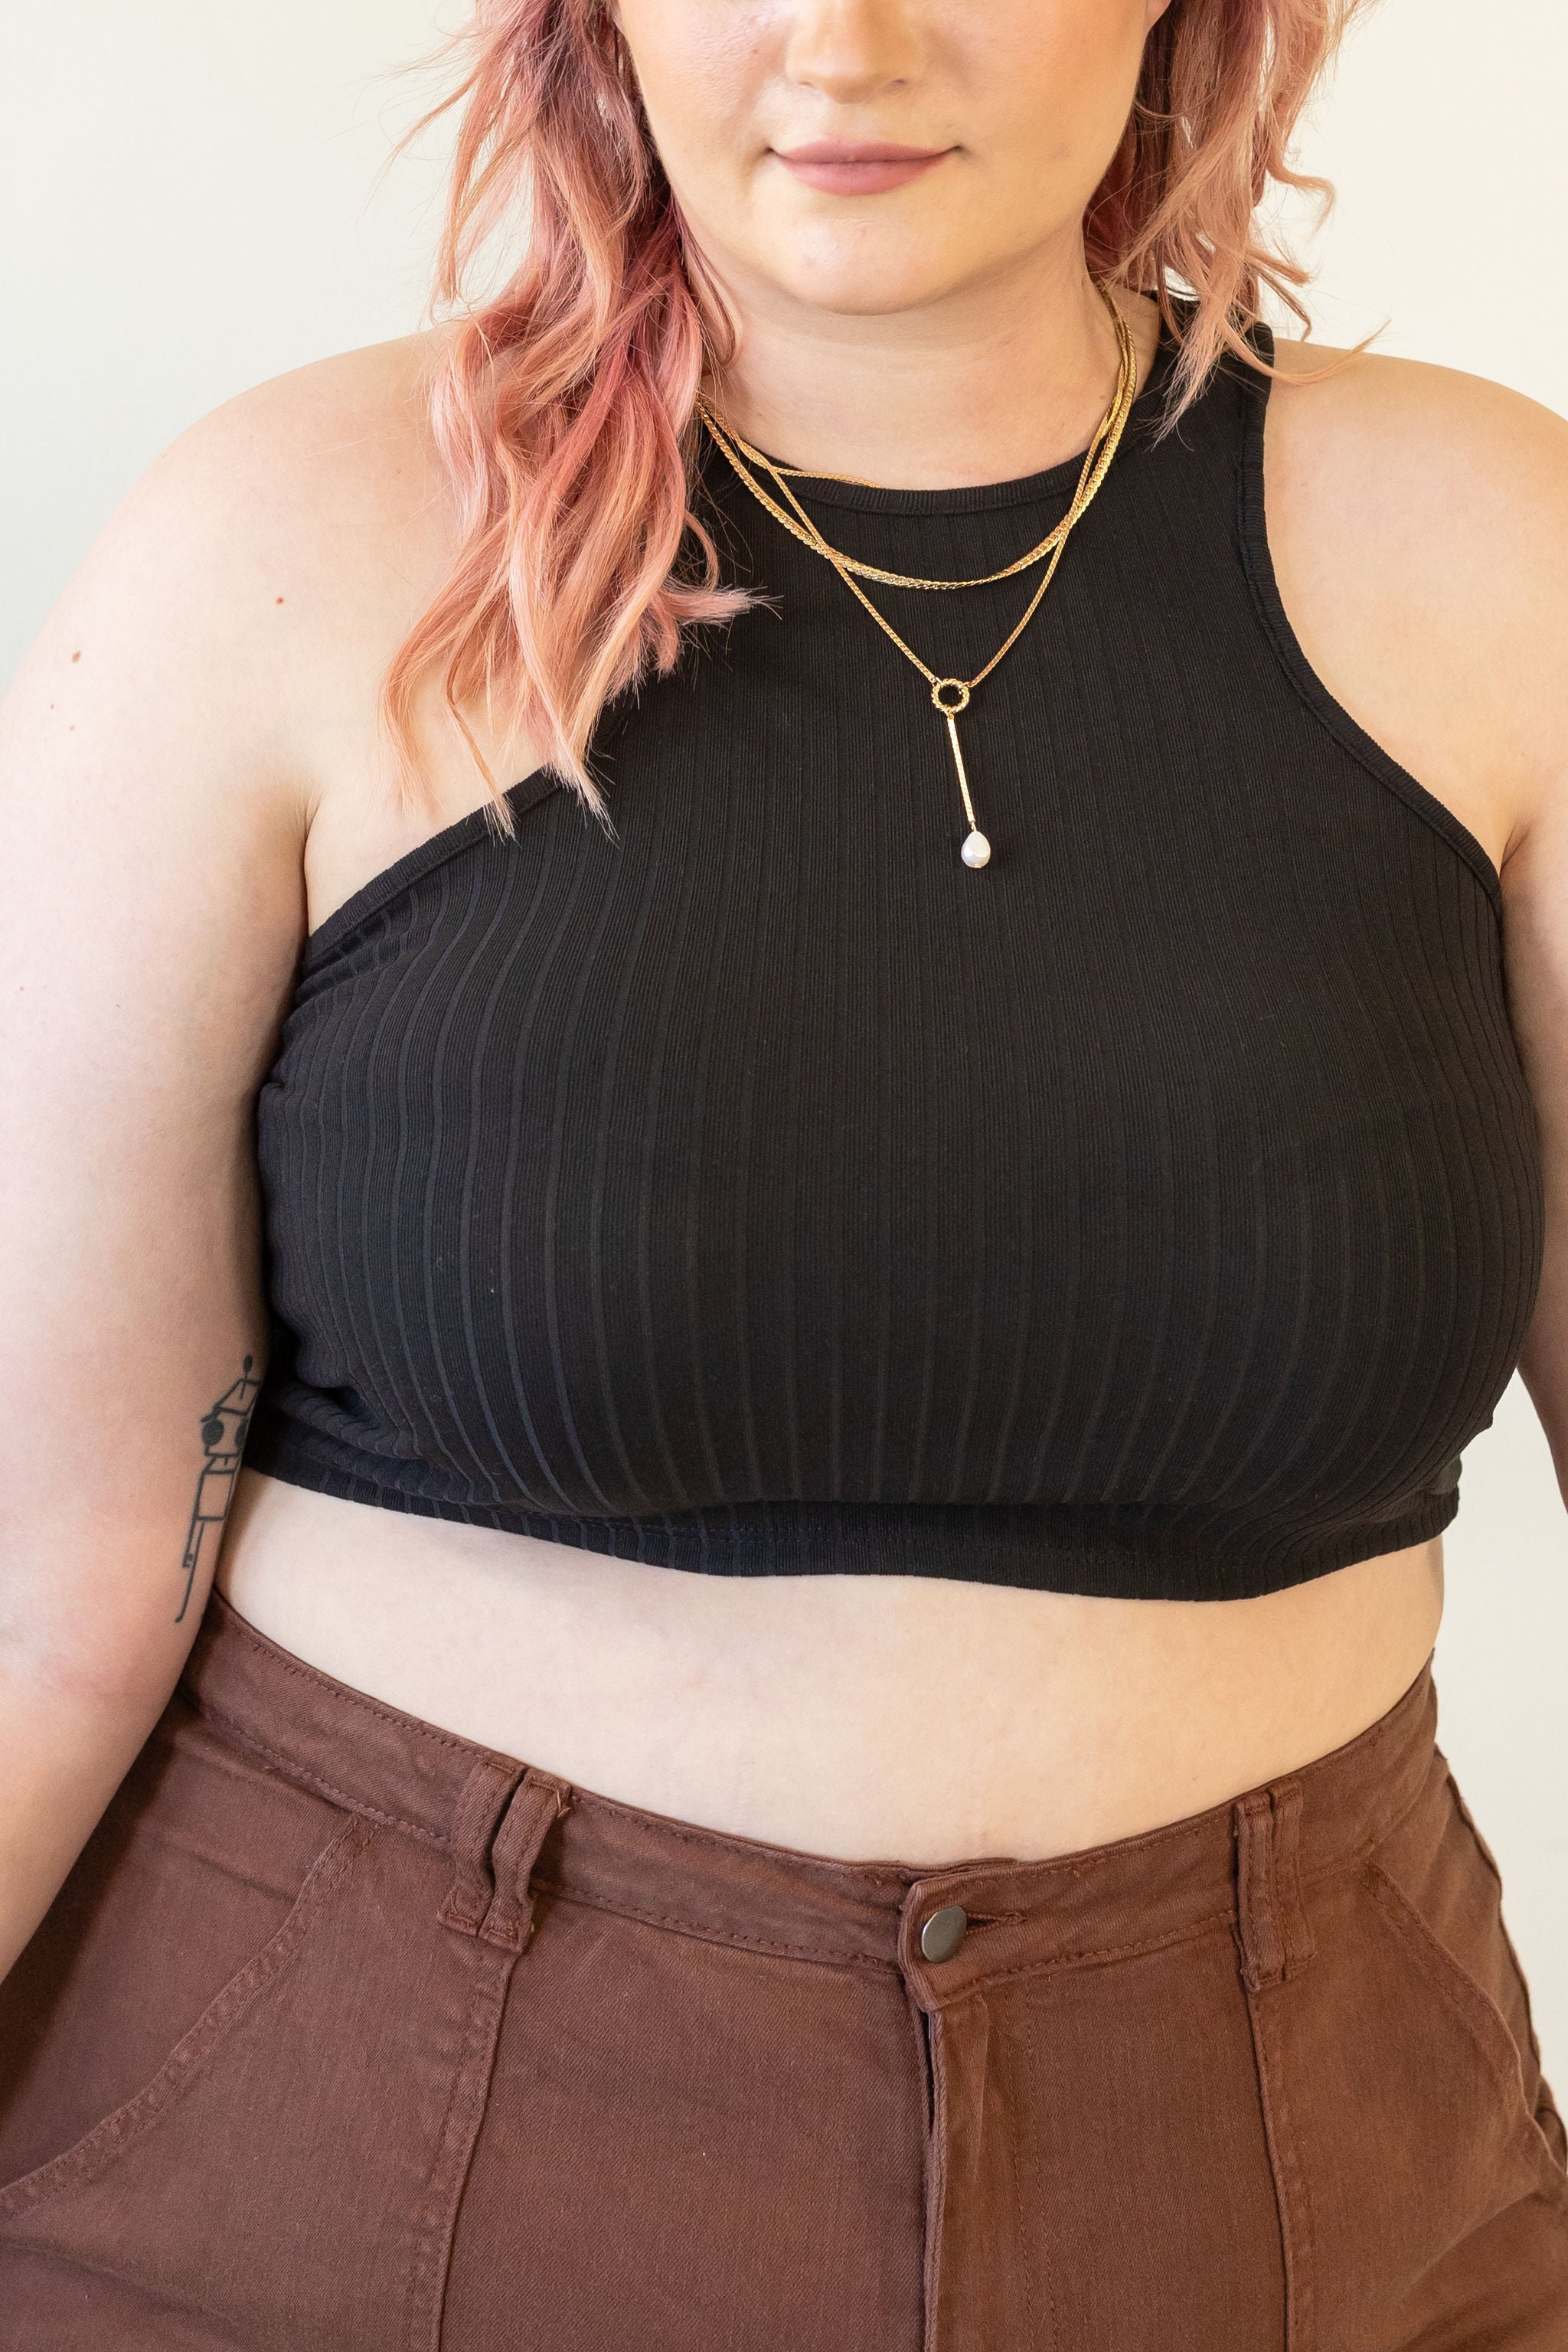 Save Me Sleeveless Crop Top by Nectar Curve